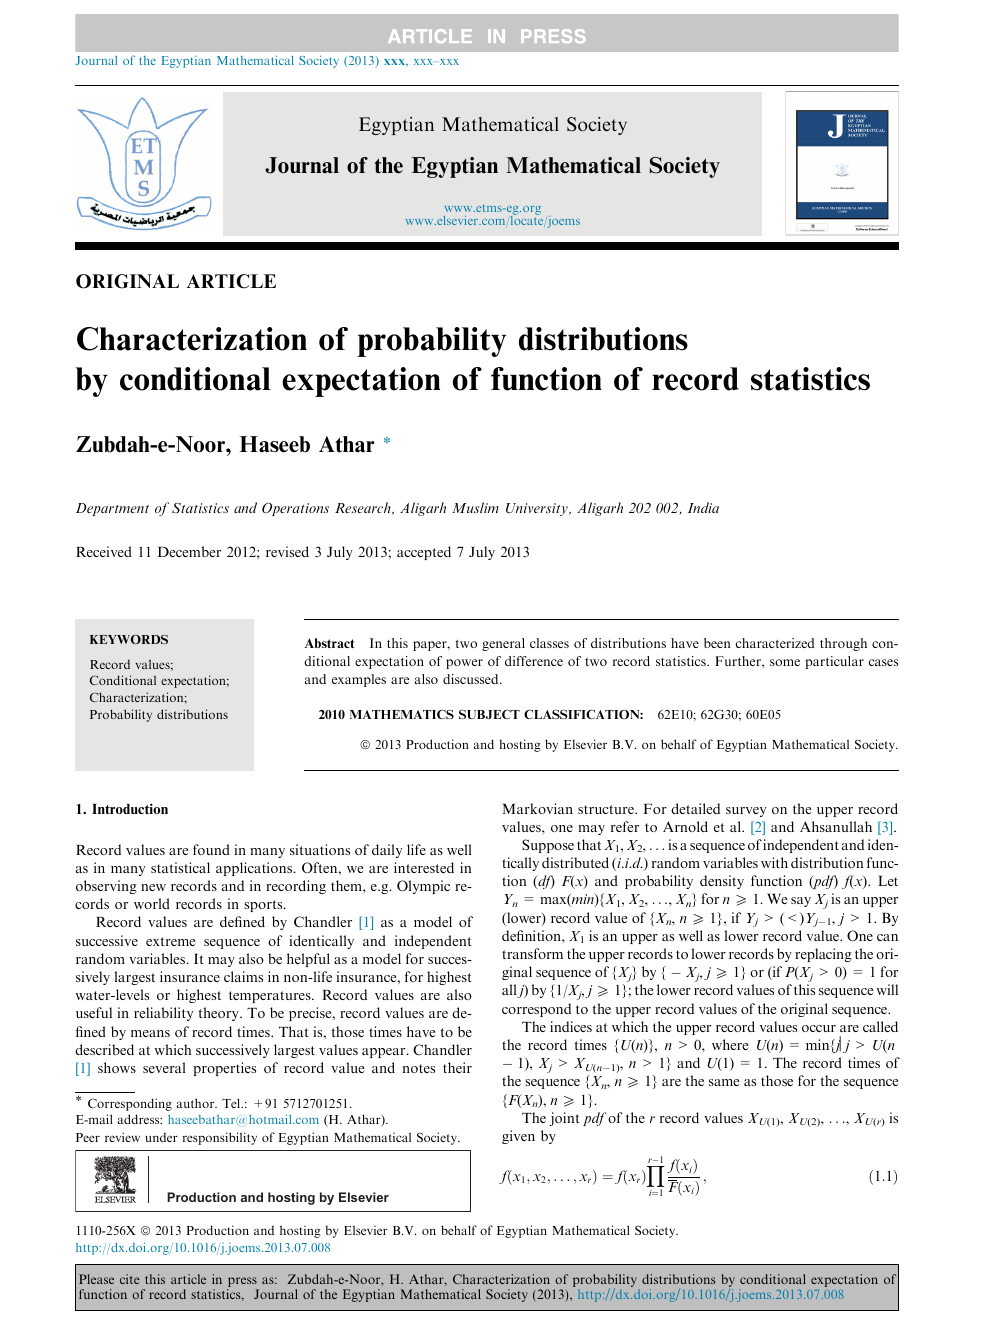 Characterization Of Probability Distributions By Conditional Expectation Of Function Of Record Statistics Topic Of Research Paper In Mathematics Download Scholarly Article Pdf And Read For Free On Cyberleninka Open Science Hub